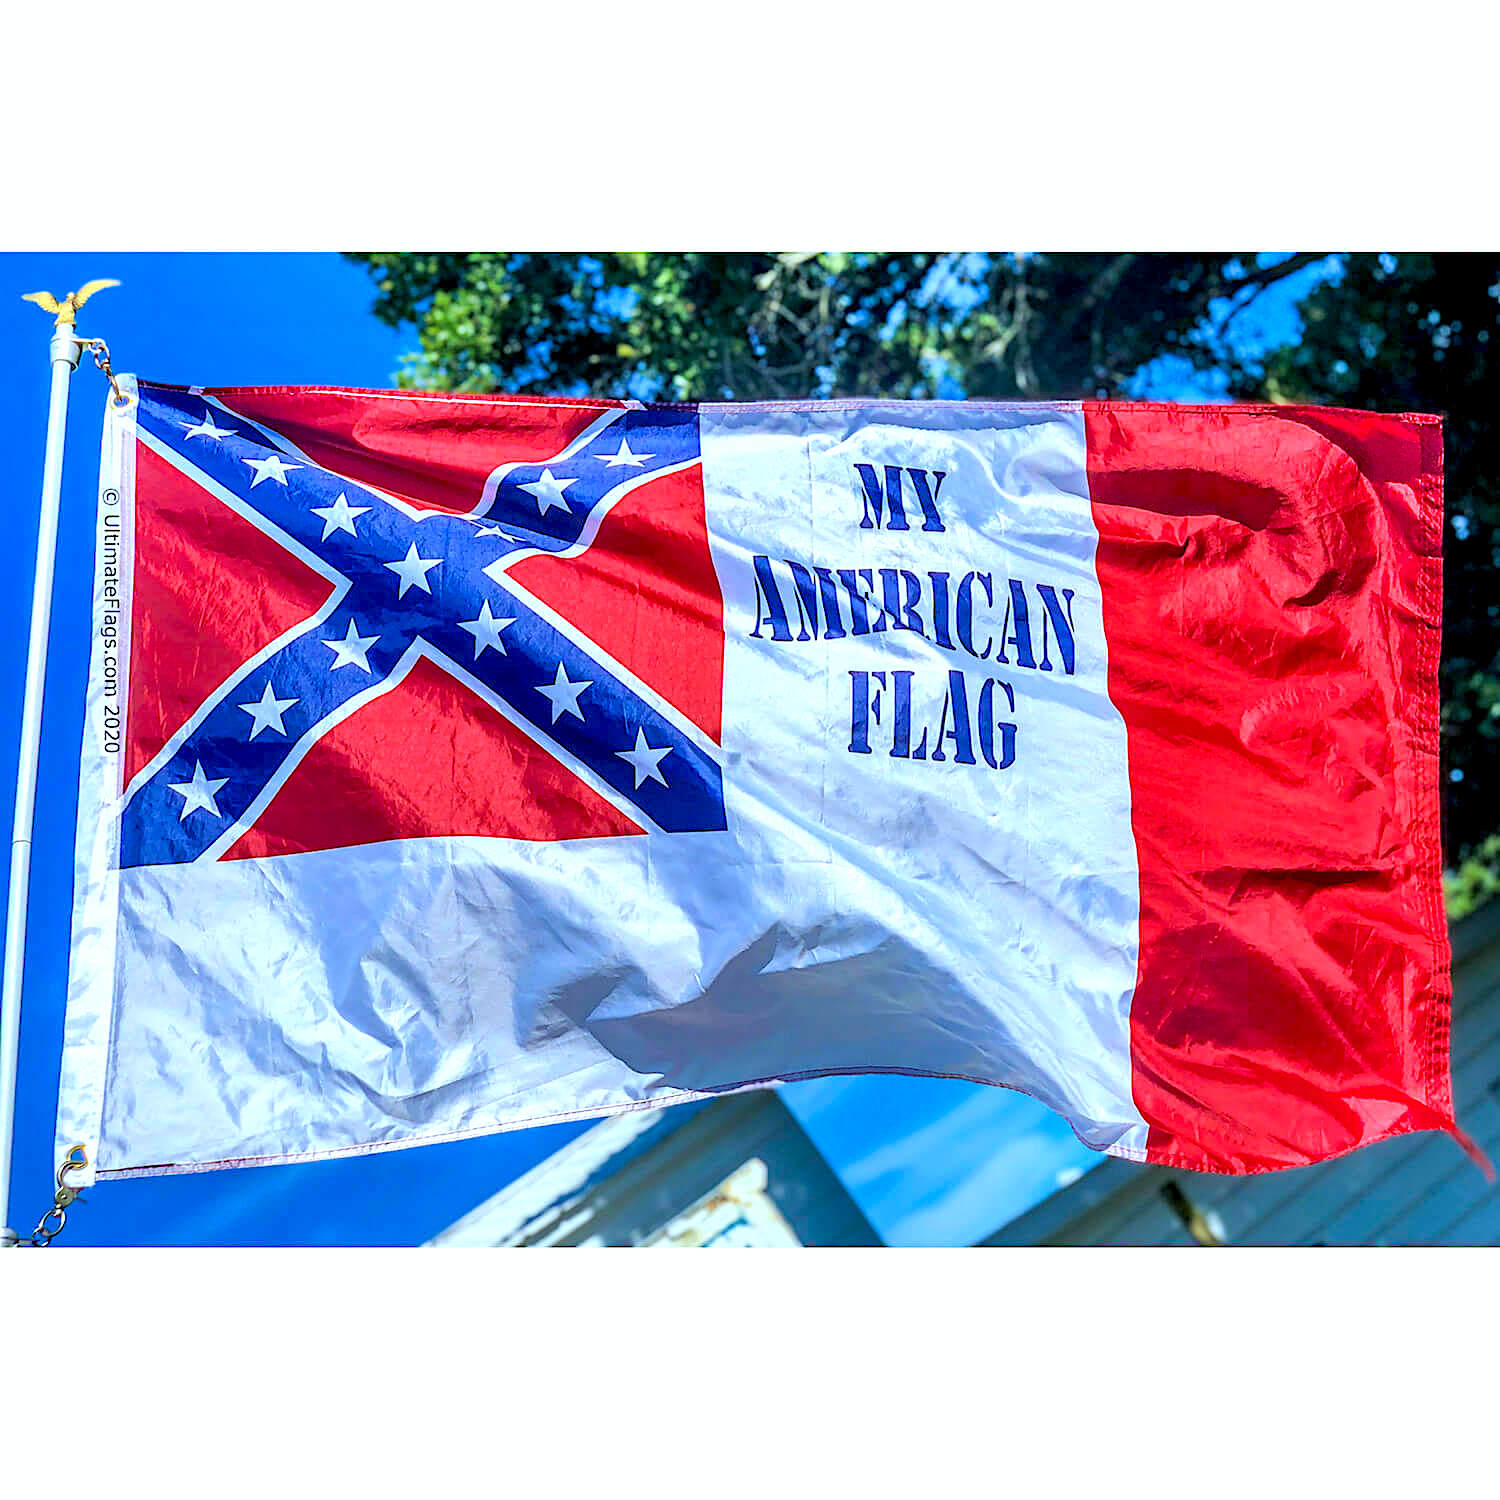 Honoring History: Ultimate Flags Inc’s Diverse Collection